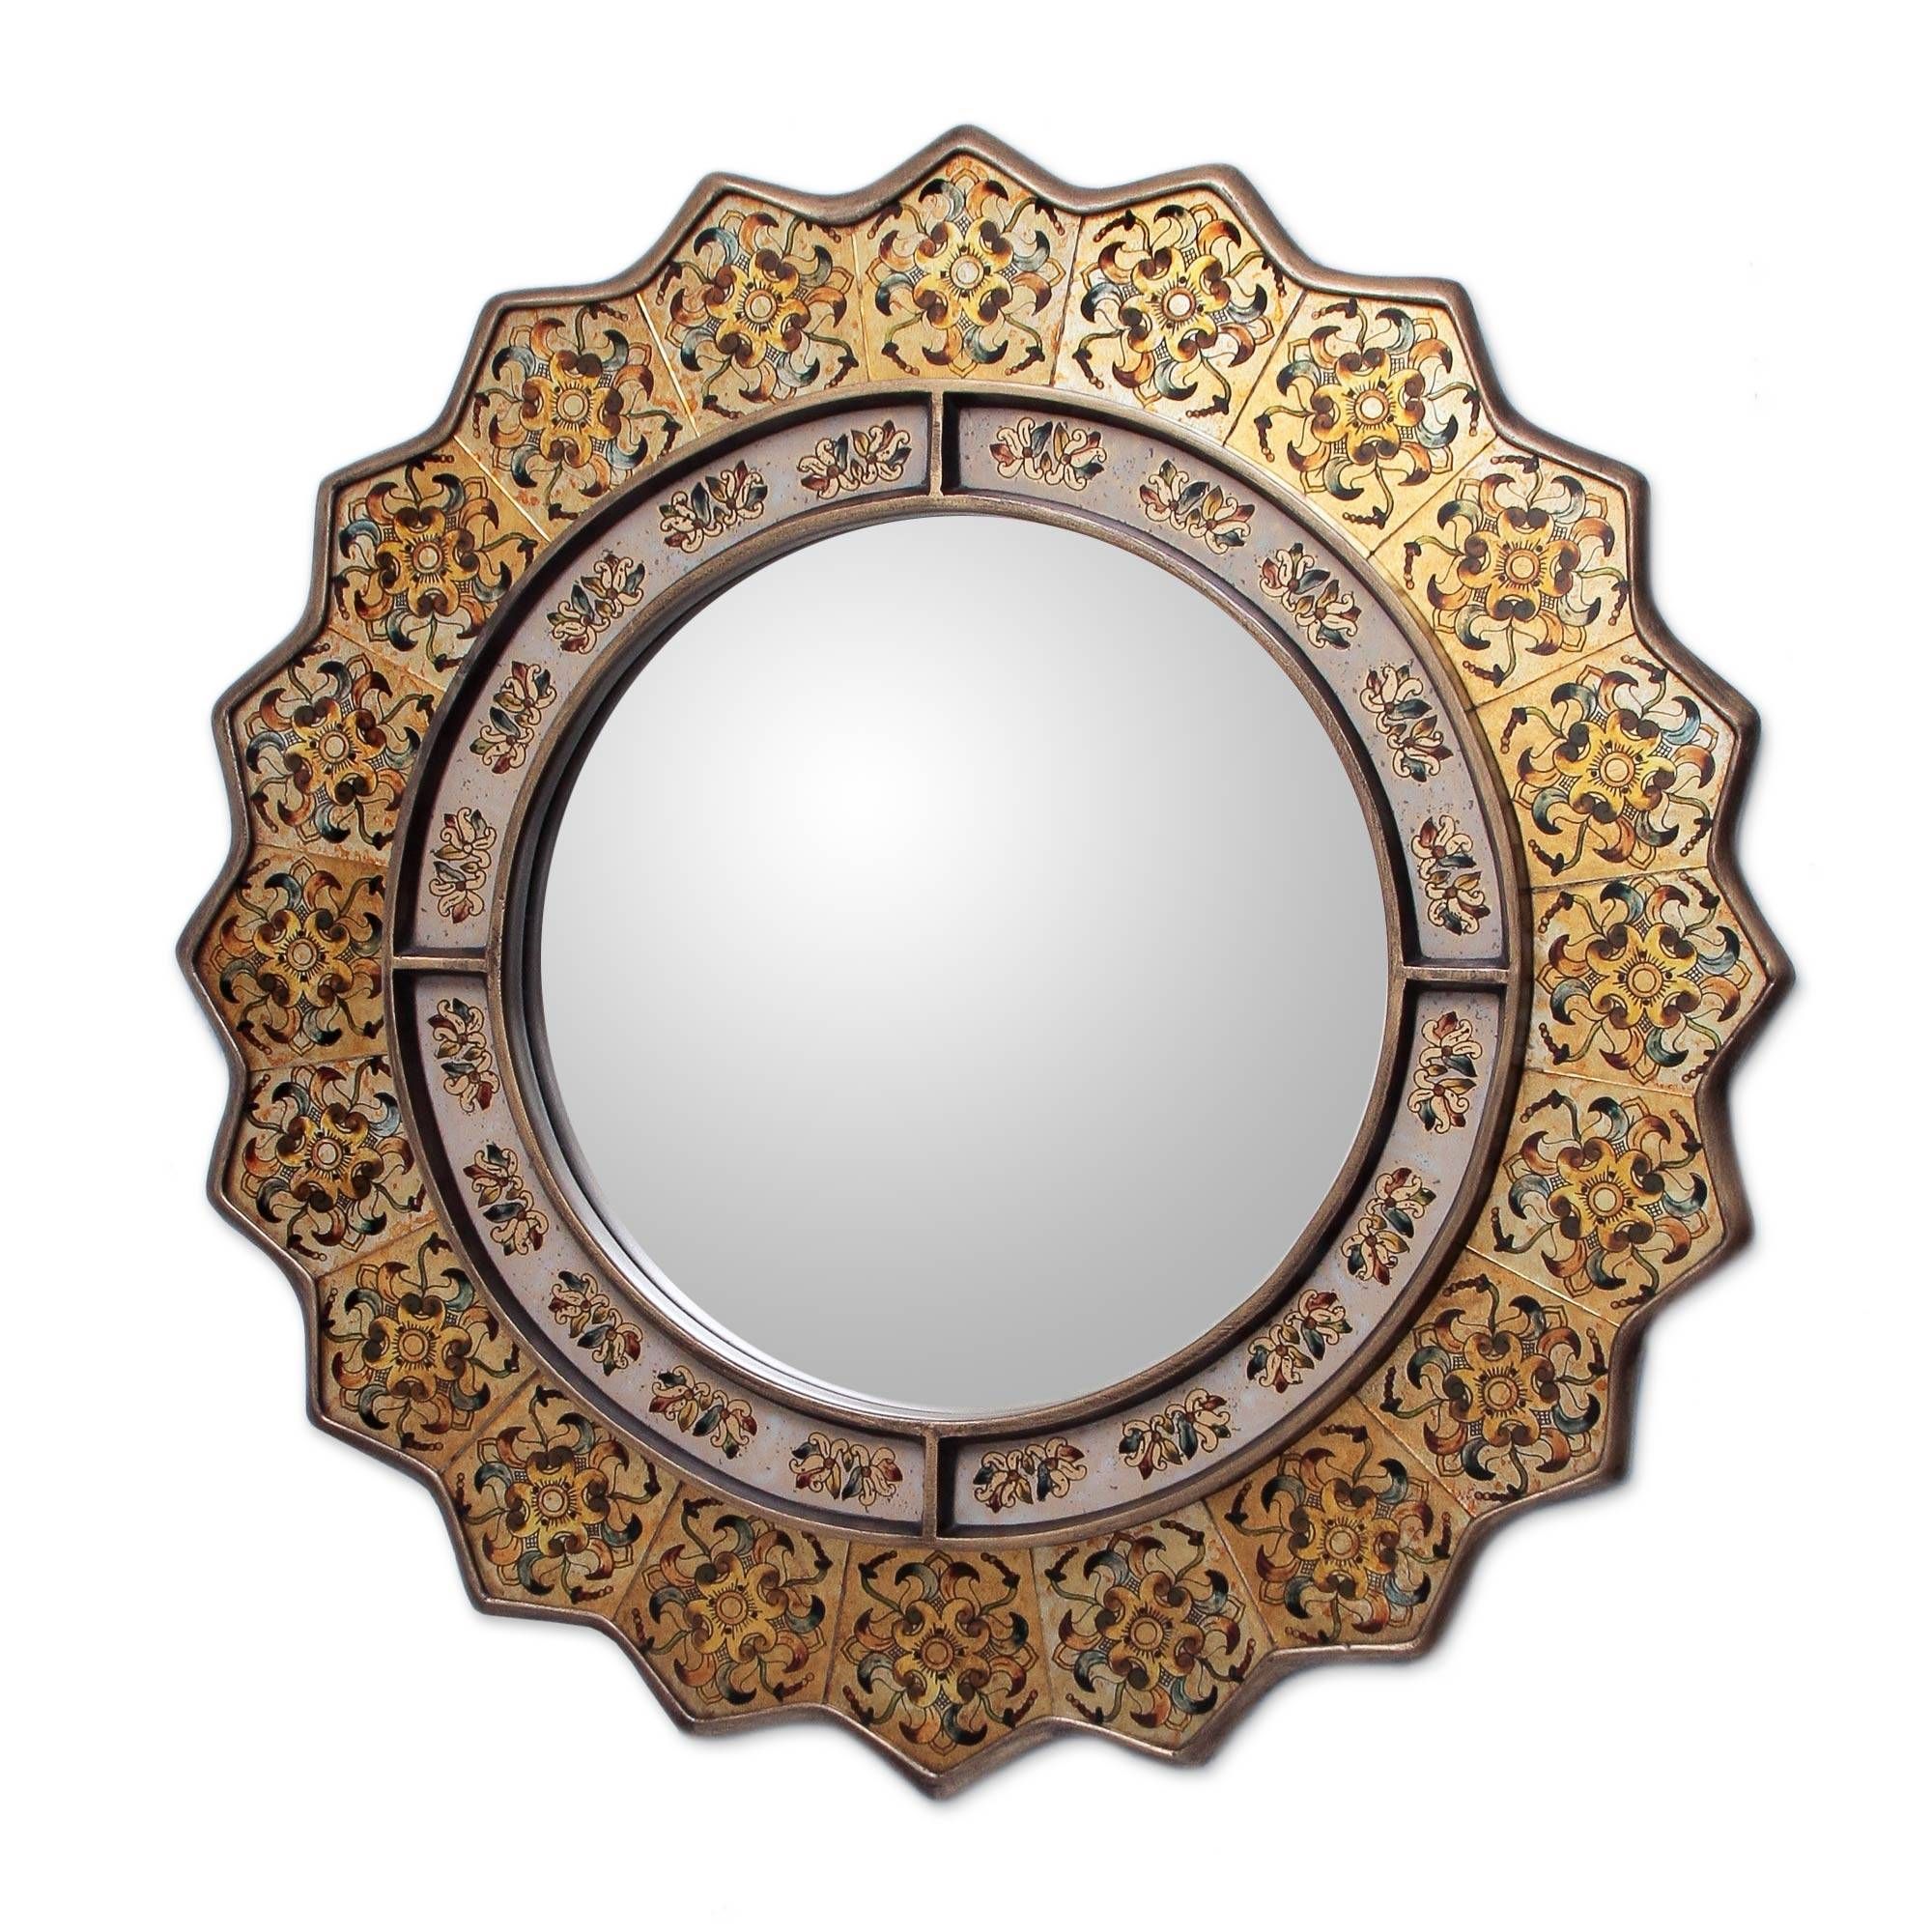 Mirror : Gold Antique Mirrors Ideal Antique Gold Gilt Mirrors Inside Vintage Gold Mirrors (View 15 of 15)